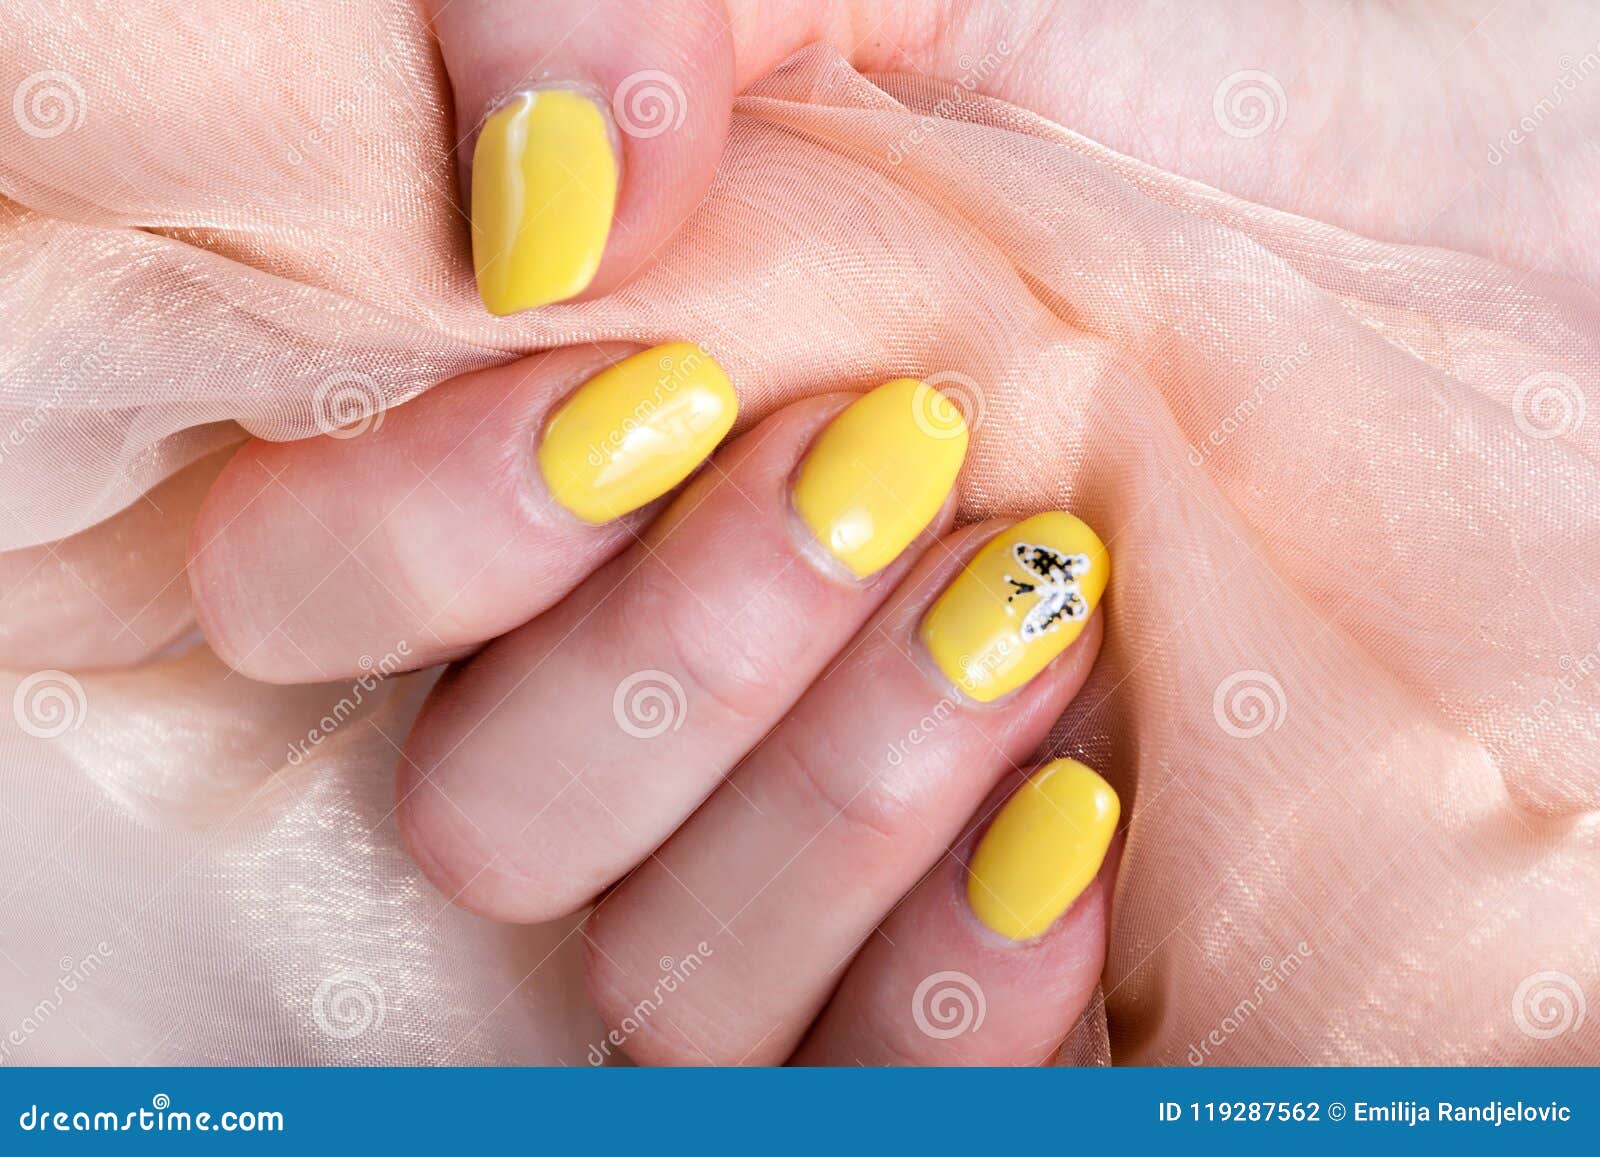 24Pcs Long Yellow Press On Nails with Small Daisies Design Fake Nails Full  Coverage Artificial Tips Finger Manicure New Yellow Press on Nails -  Walmart.com